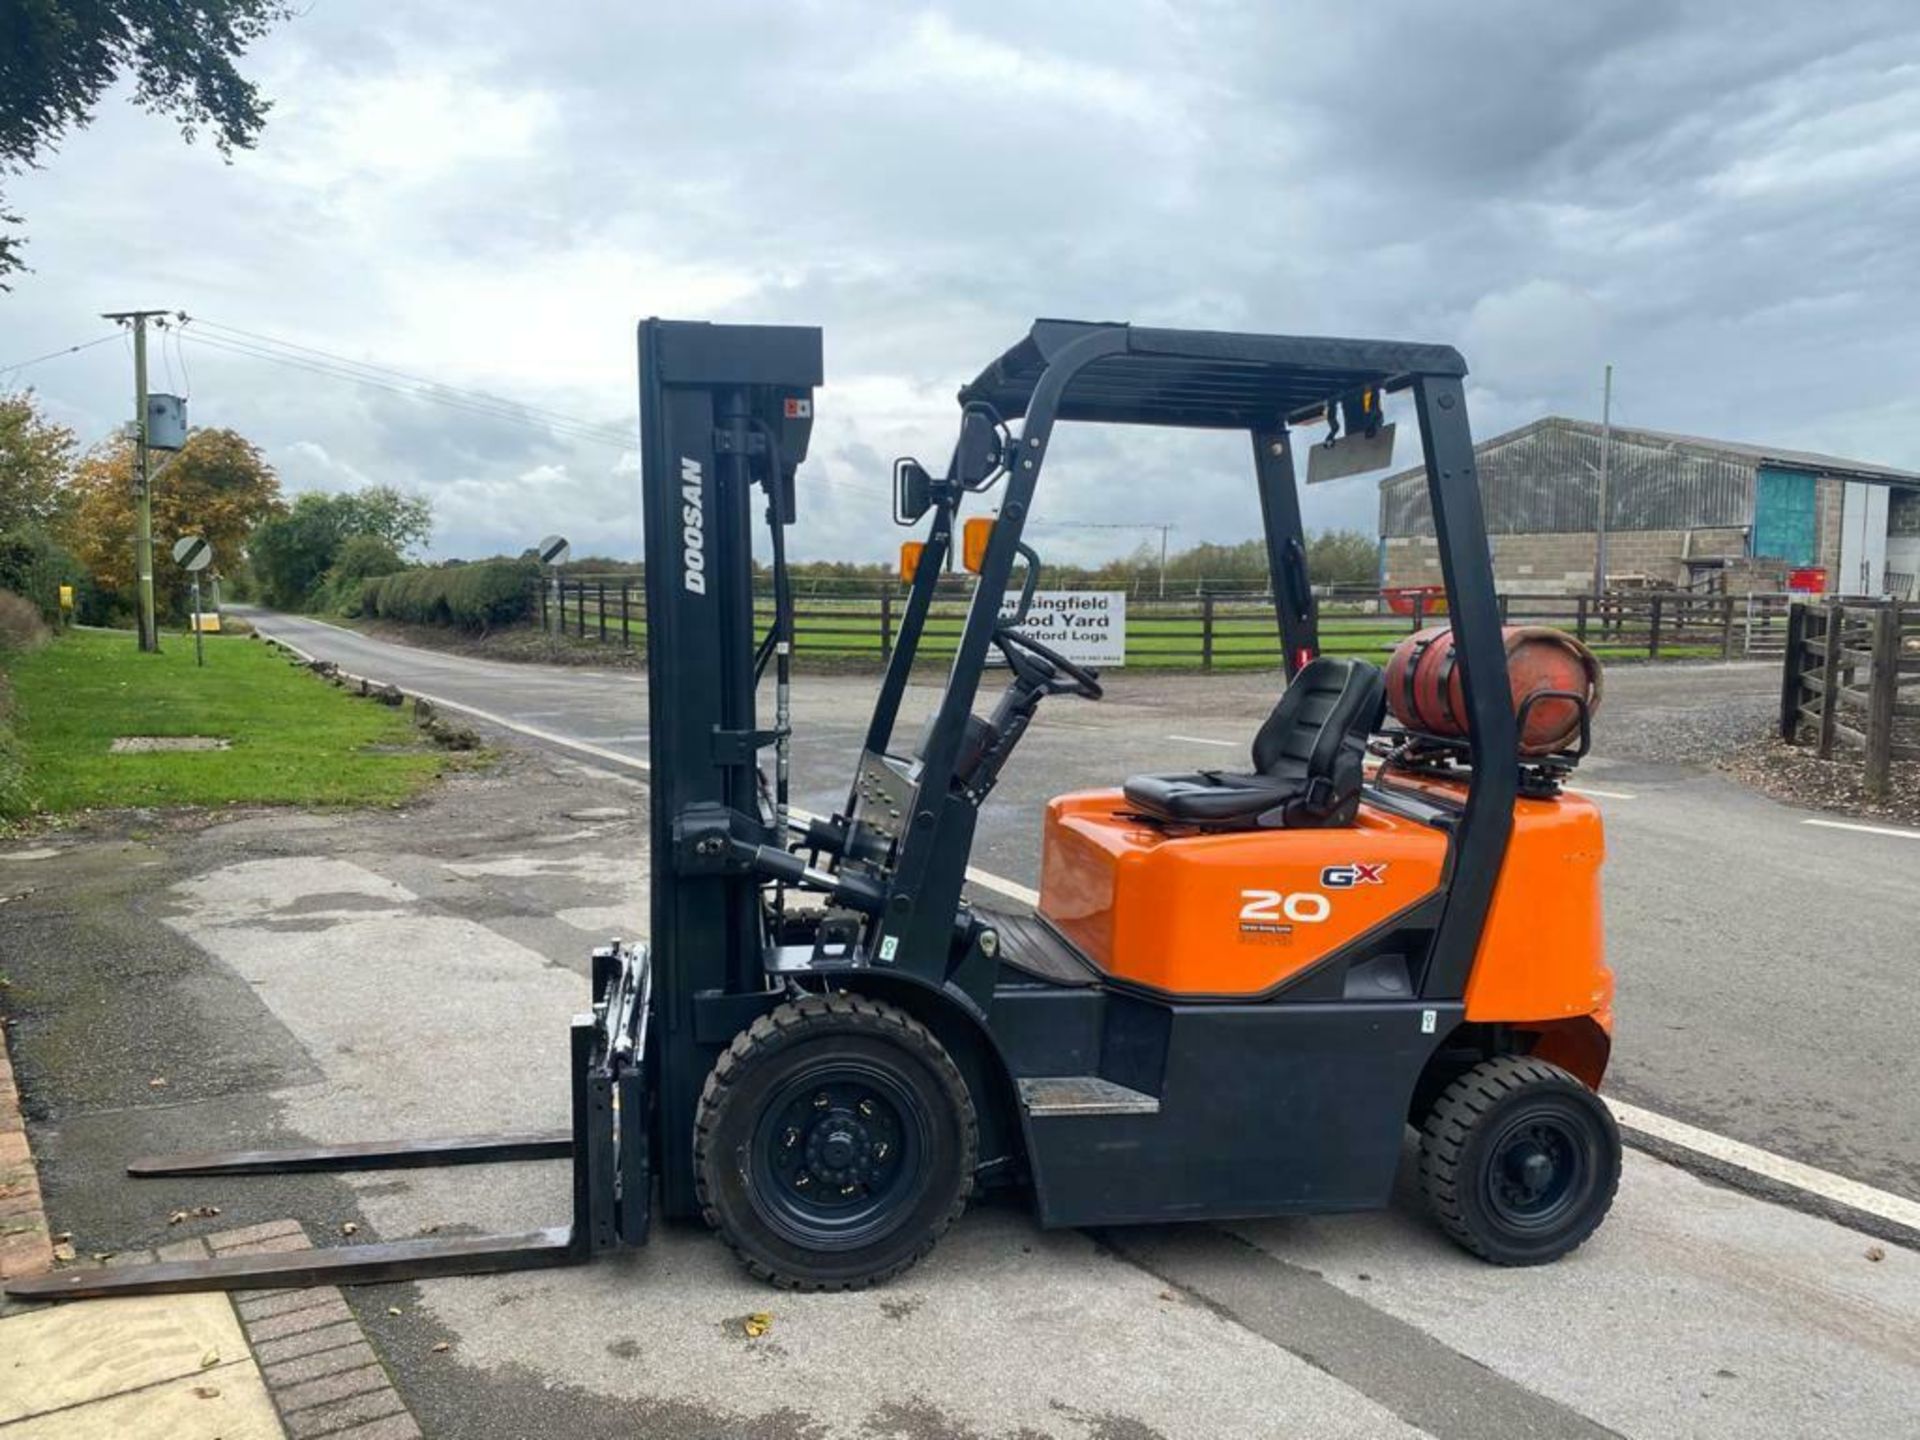 DOOSAN 2 TON GX GAS FORK LIFT, MODEL: G20G, 2015, TRIPLE MAST, SIDE SHIFT, CONTAINER SPEC, 944 HOURS - Image 2 of 11